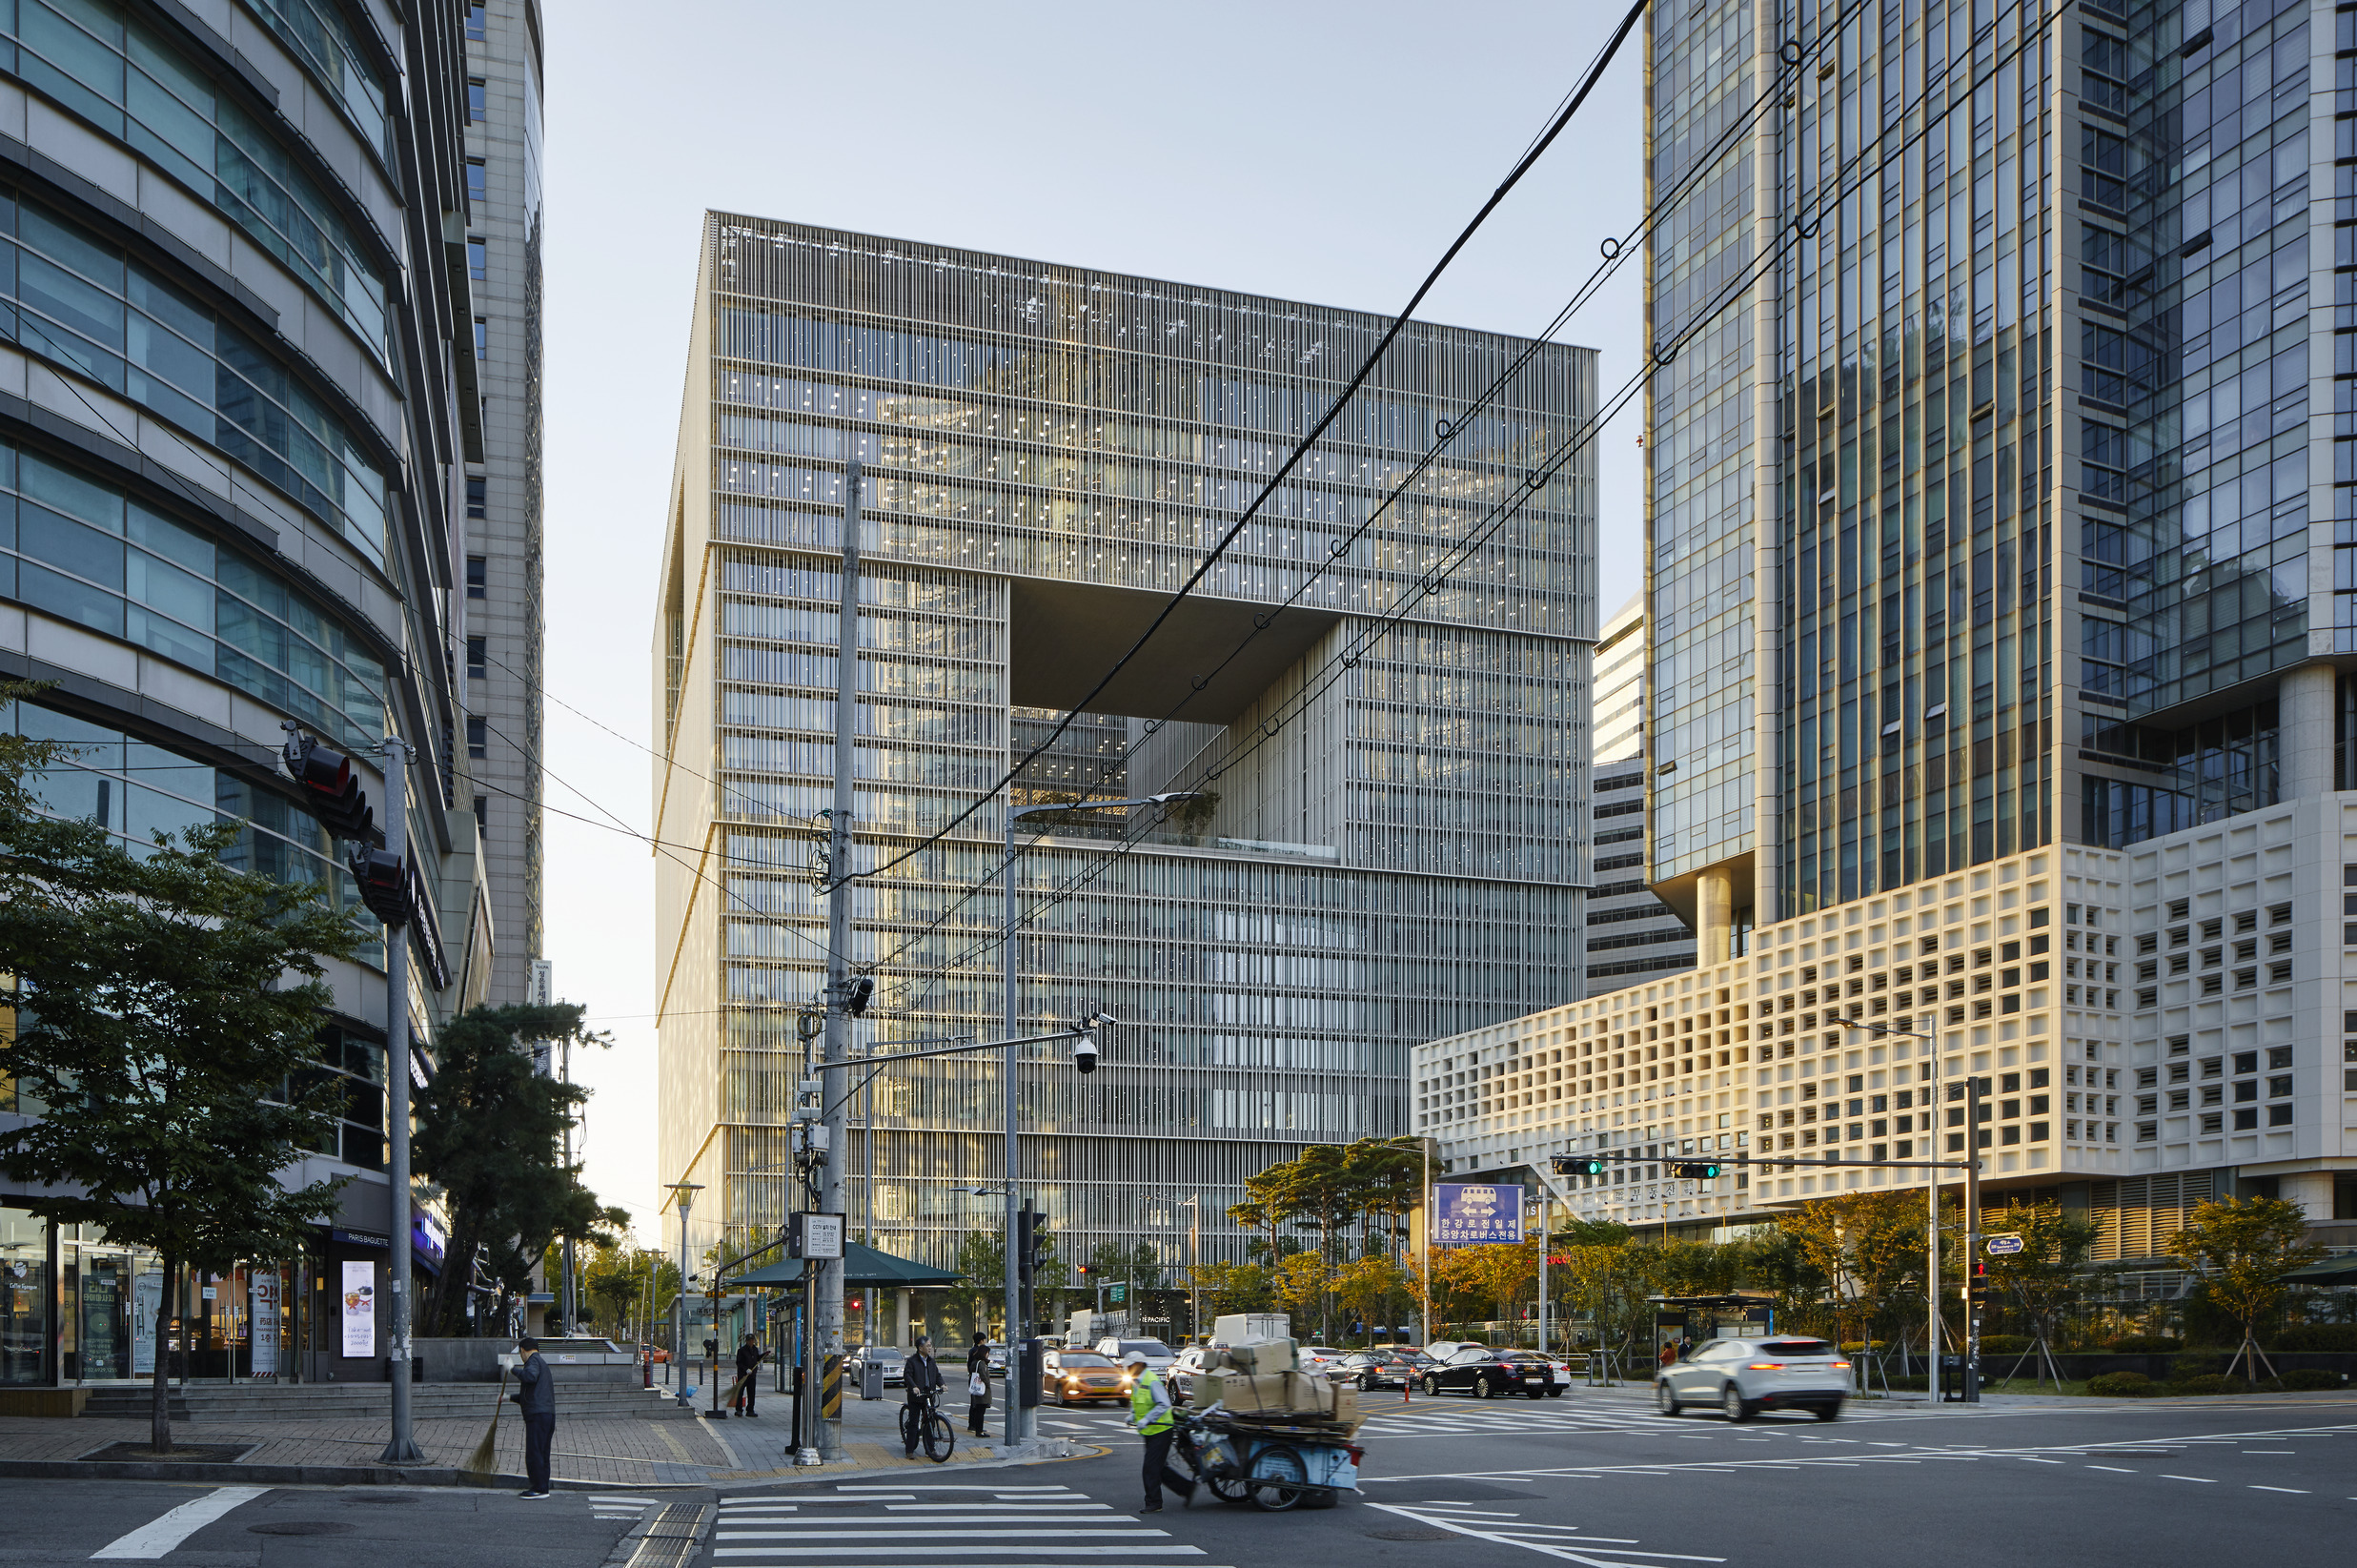 Amorepacific headquarters • David Chipperfield Architects